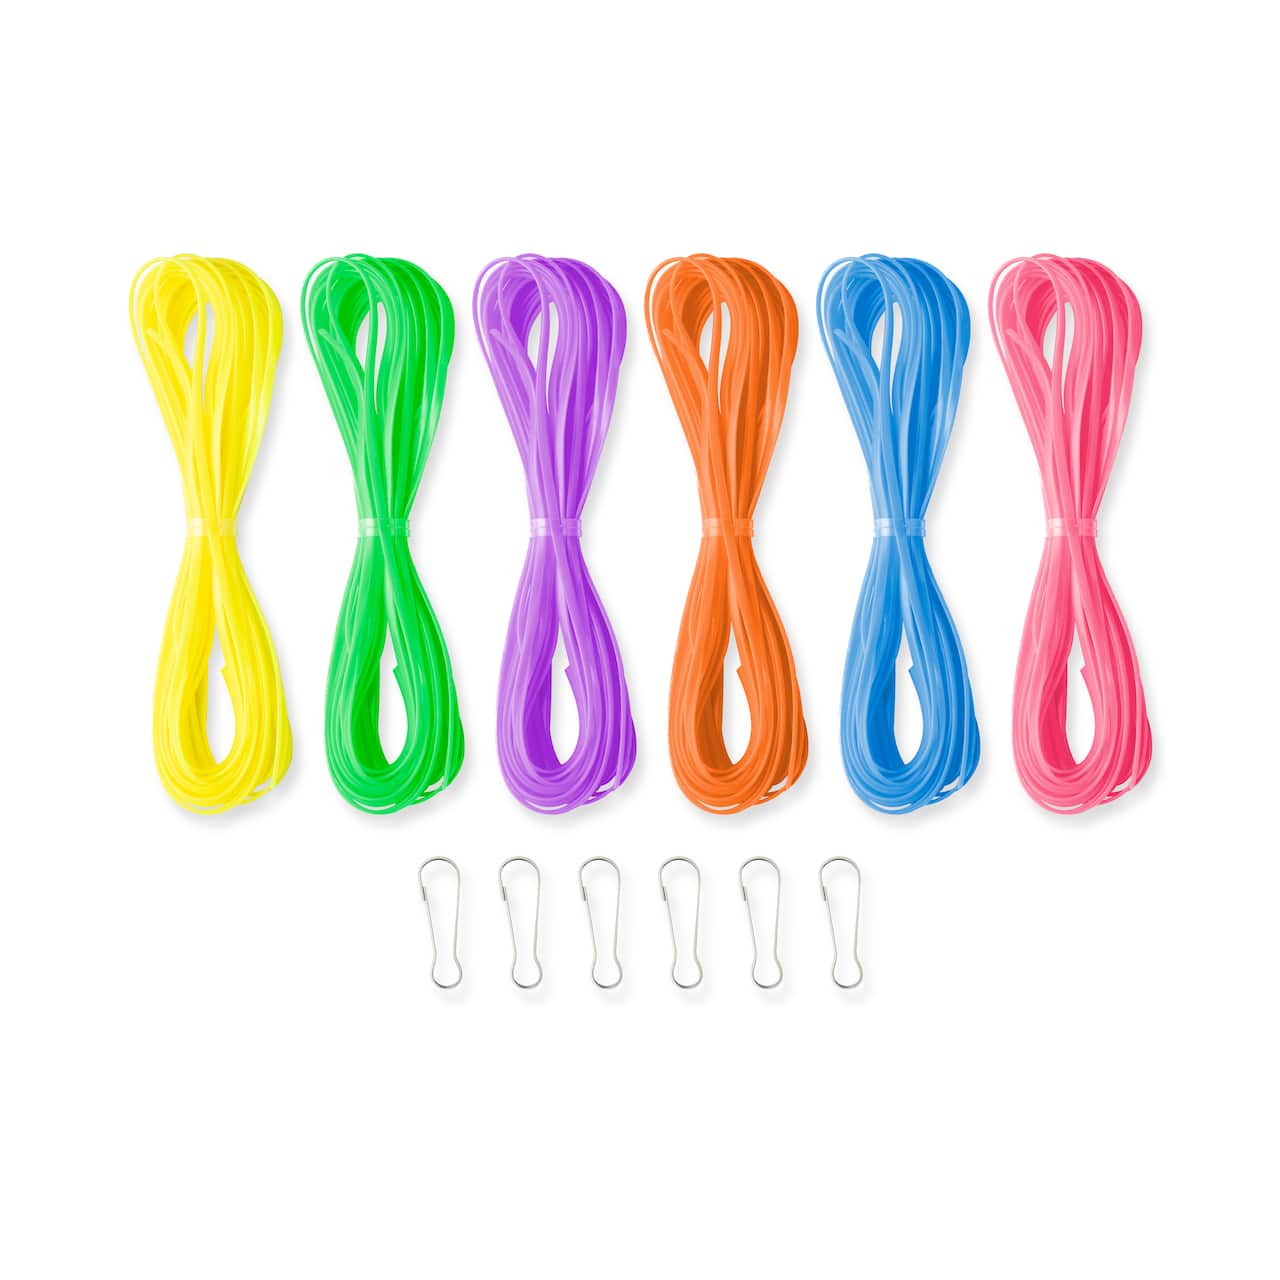 Neon Plastic Lacing Kit by Creatology™